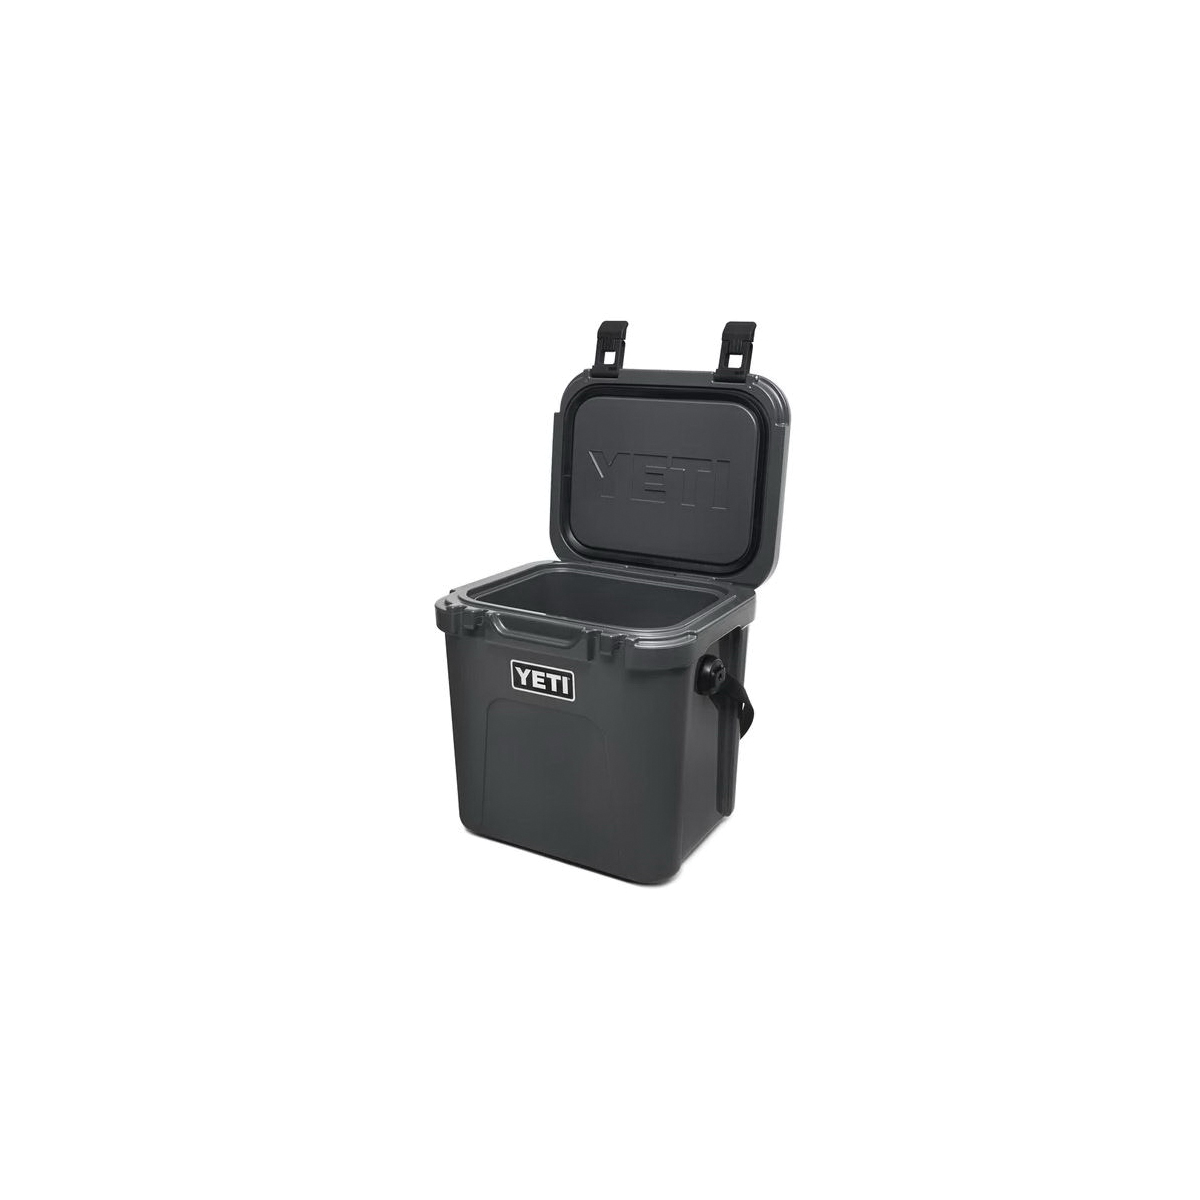 YETI Roadie 24 10022160000 Hard Cooler, 18 Can Cooler, Charcoal - 4